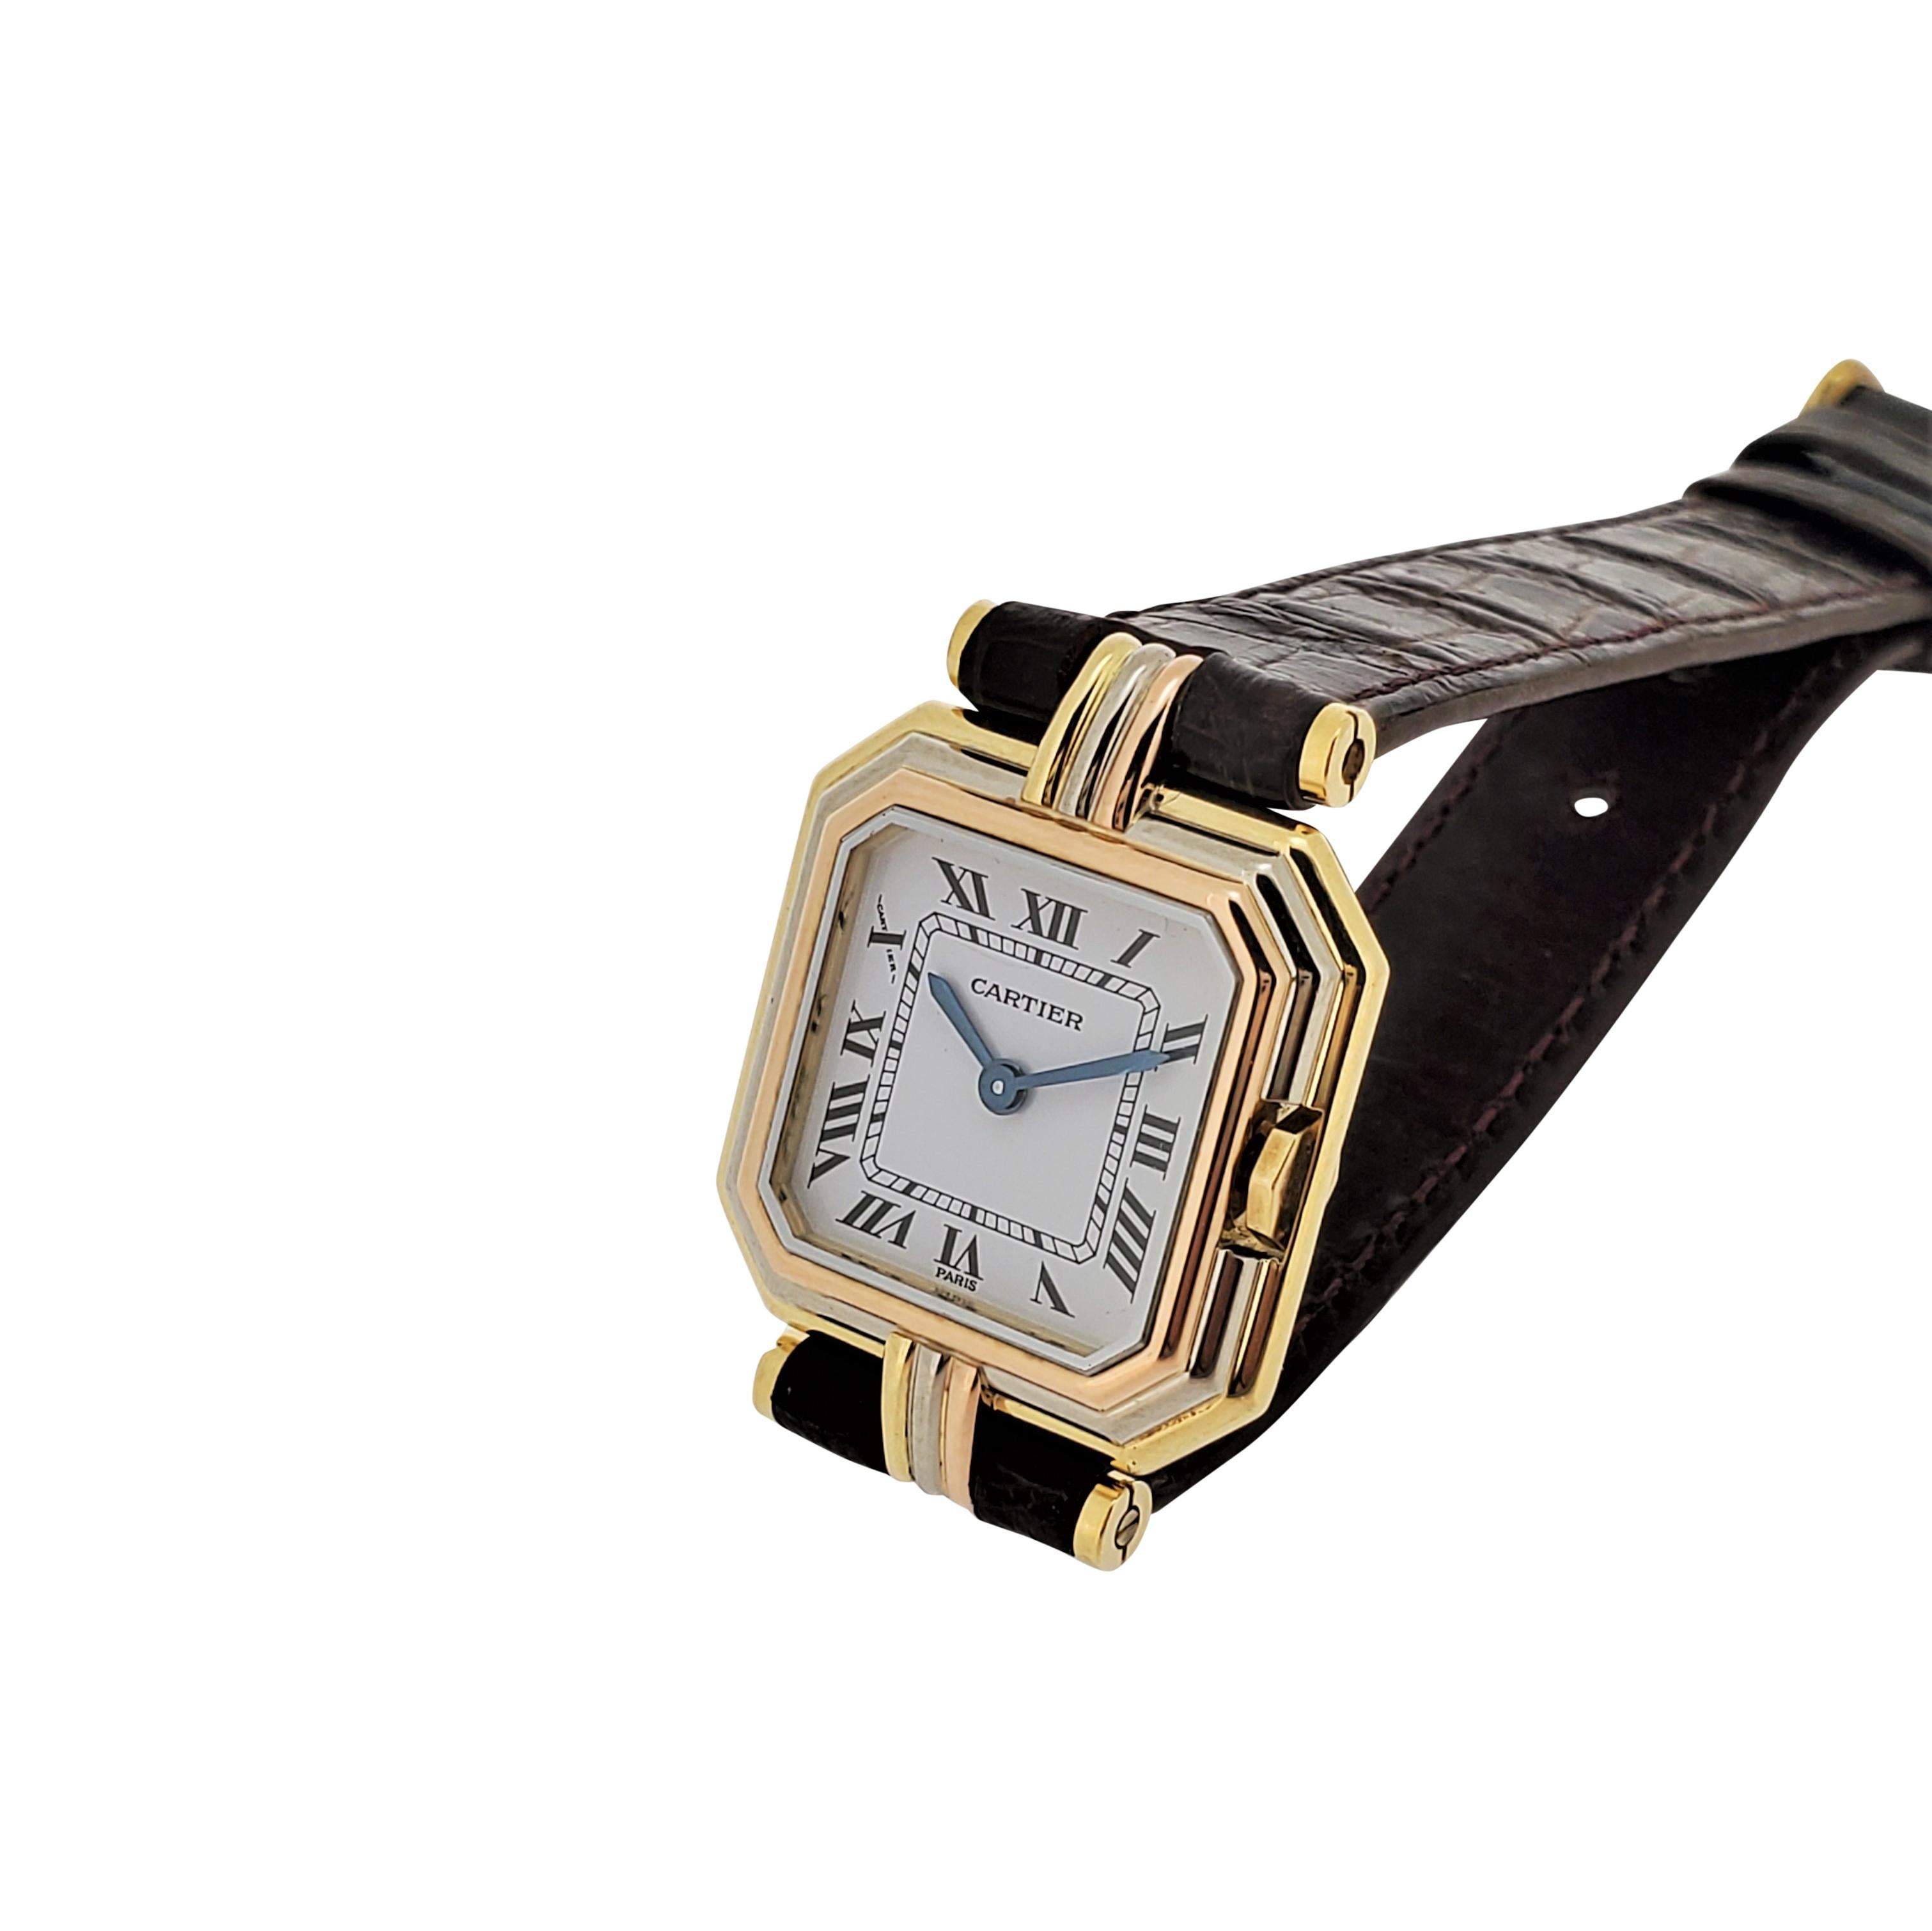 Cartier Paris Vintage small Ceinture Tri-Color gold case made in 18K gold measurieng 22 x 29mm lug to lug.  The watch is accompanied with  crocodile strap and buckle.  The watch is in new unpolished condition.  Triple signed,  dial case and